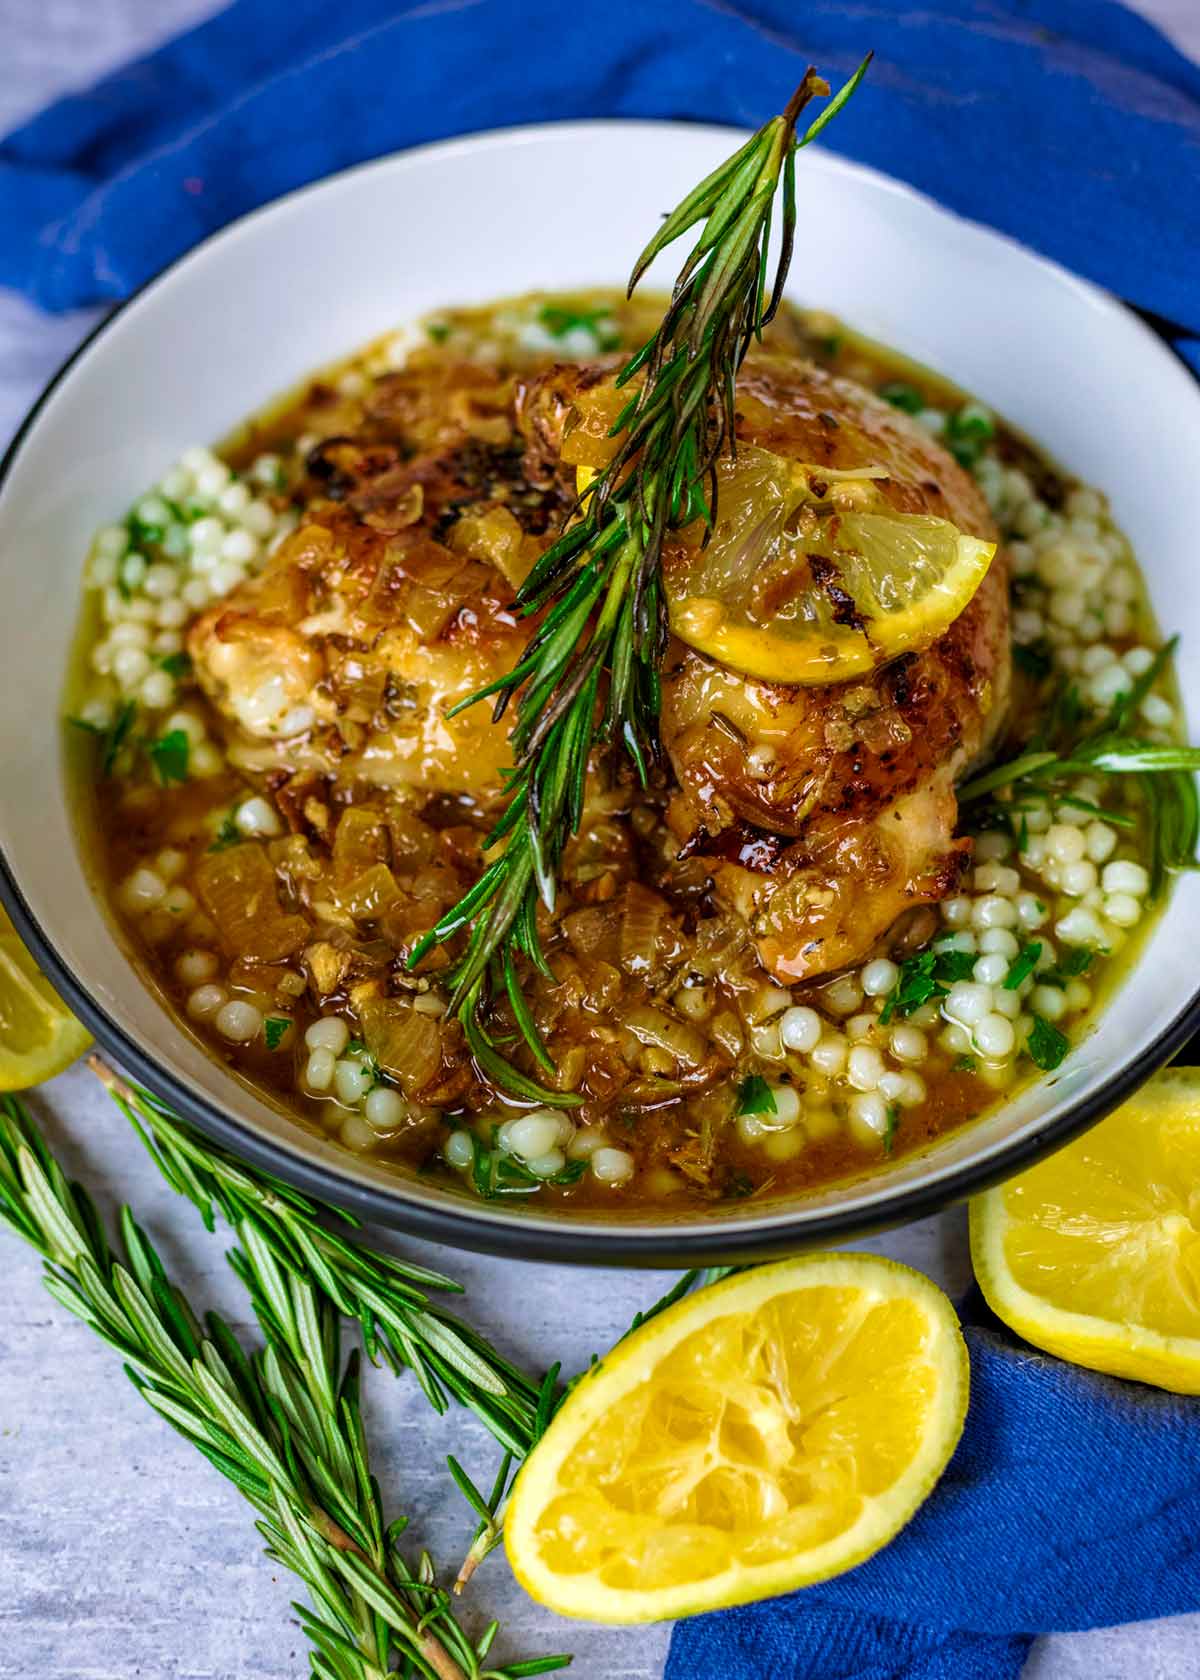 A cooked chicken thigh on top of couscous in a bowl with a sprig of rosemary on top.